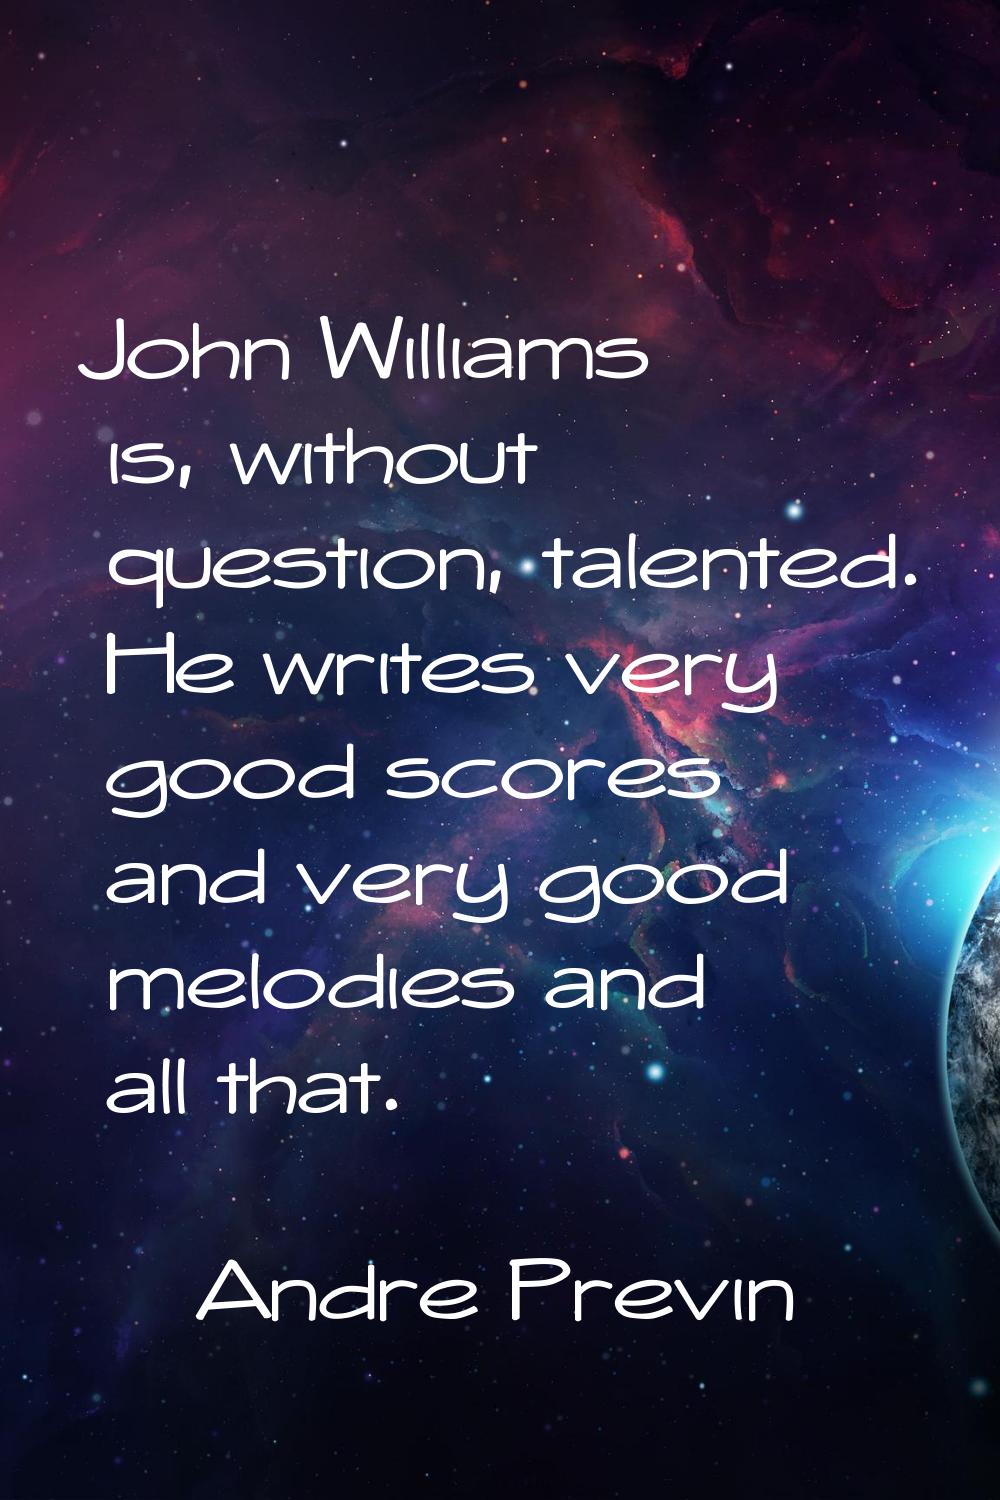 John Williams is, without question, talented. He writes very good scores and very good melodies and